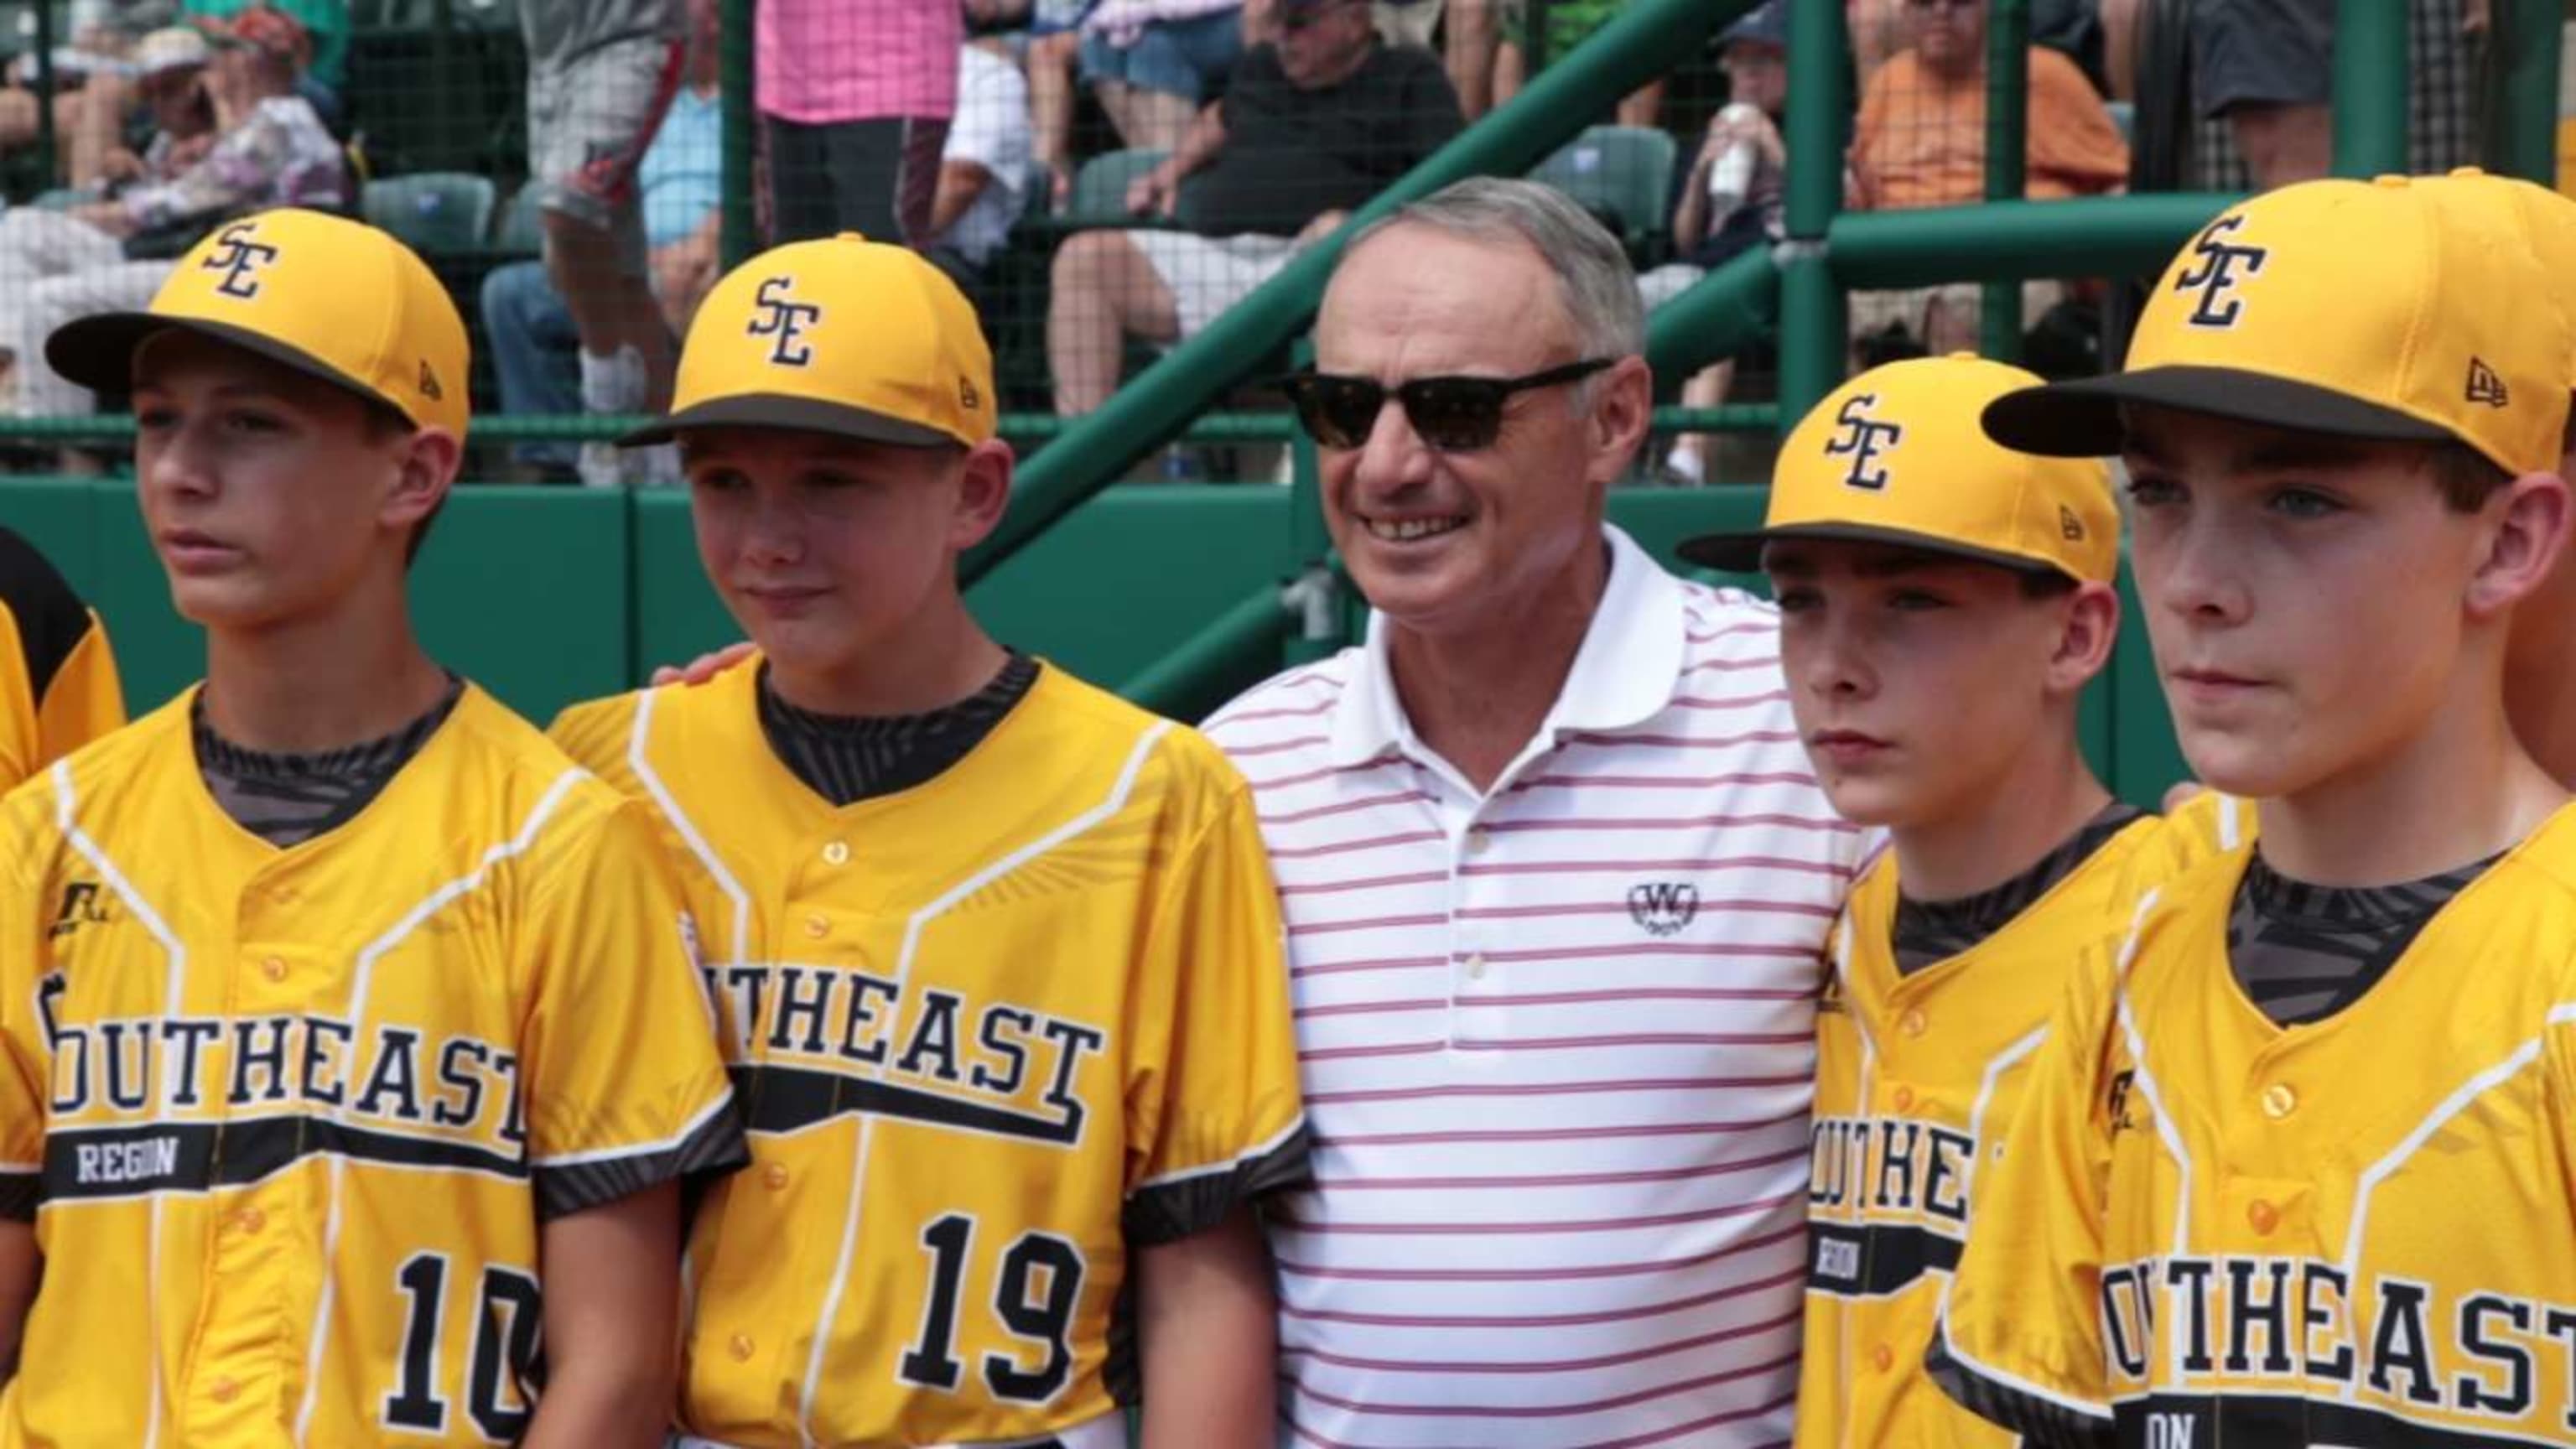 Little League Classic: MLB players embrace fun of Williamsport event